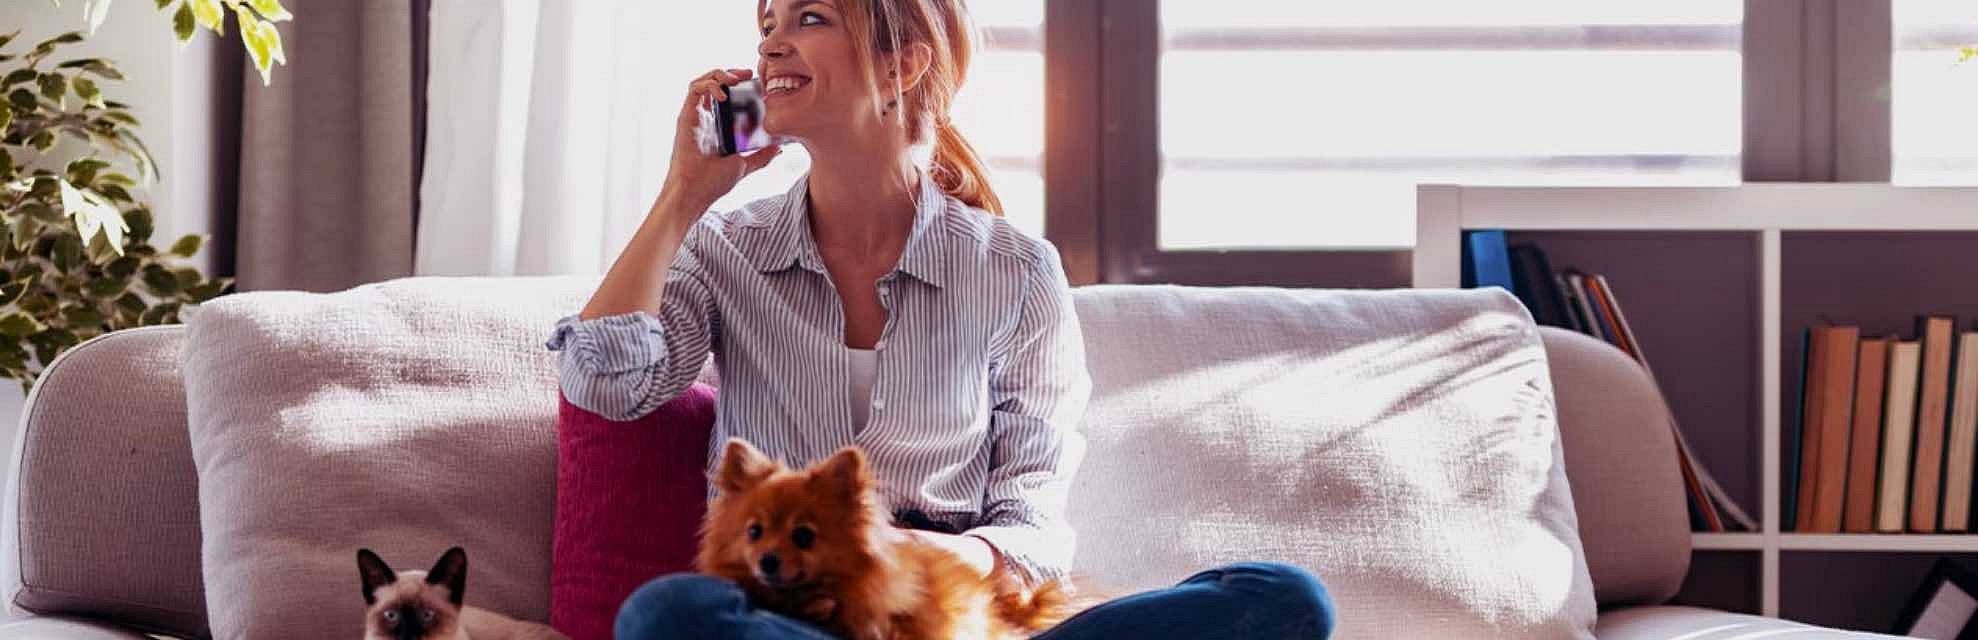 Woman sitting on a couch with two pets